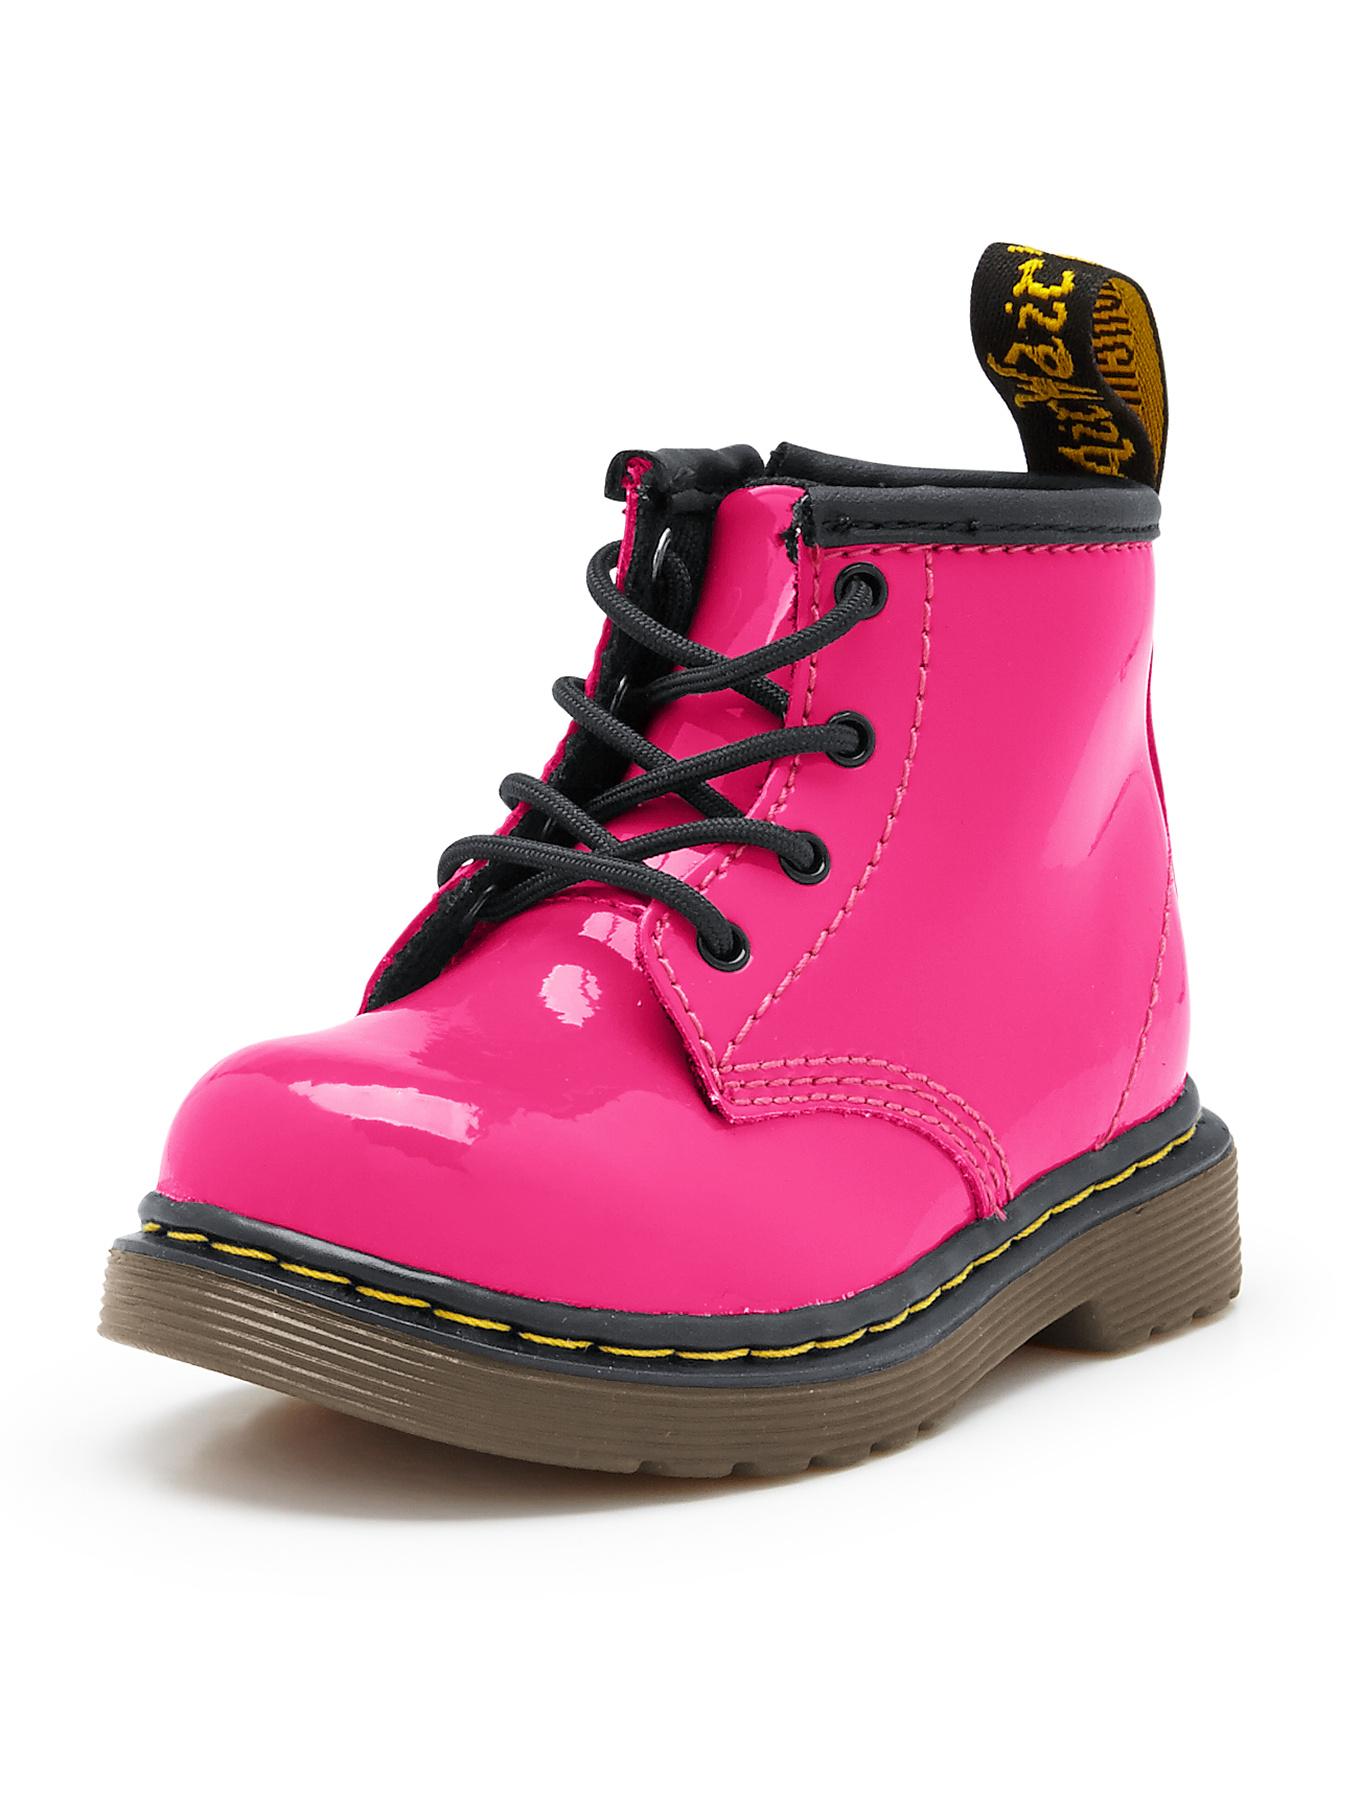 Girl | Shoes & boots | Child & baby | www.littlewoodsireland.ie